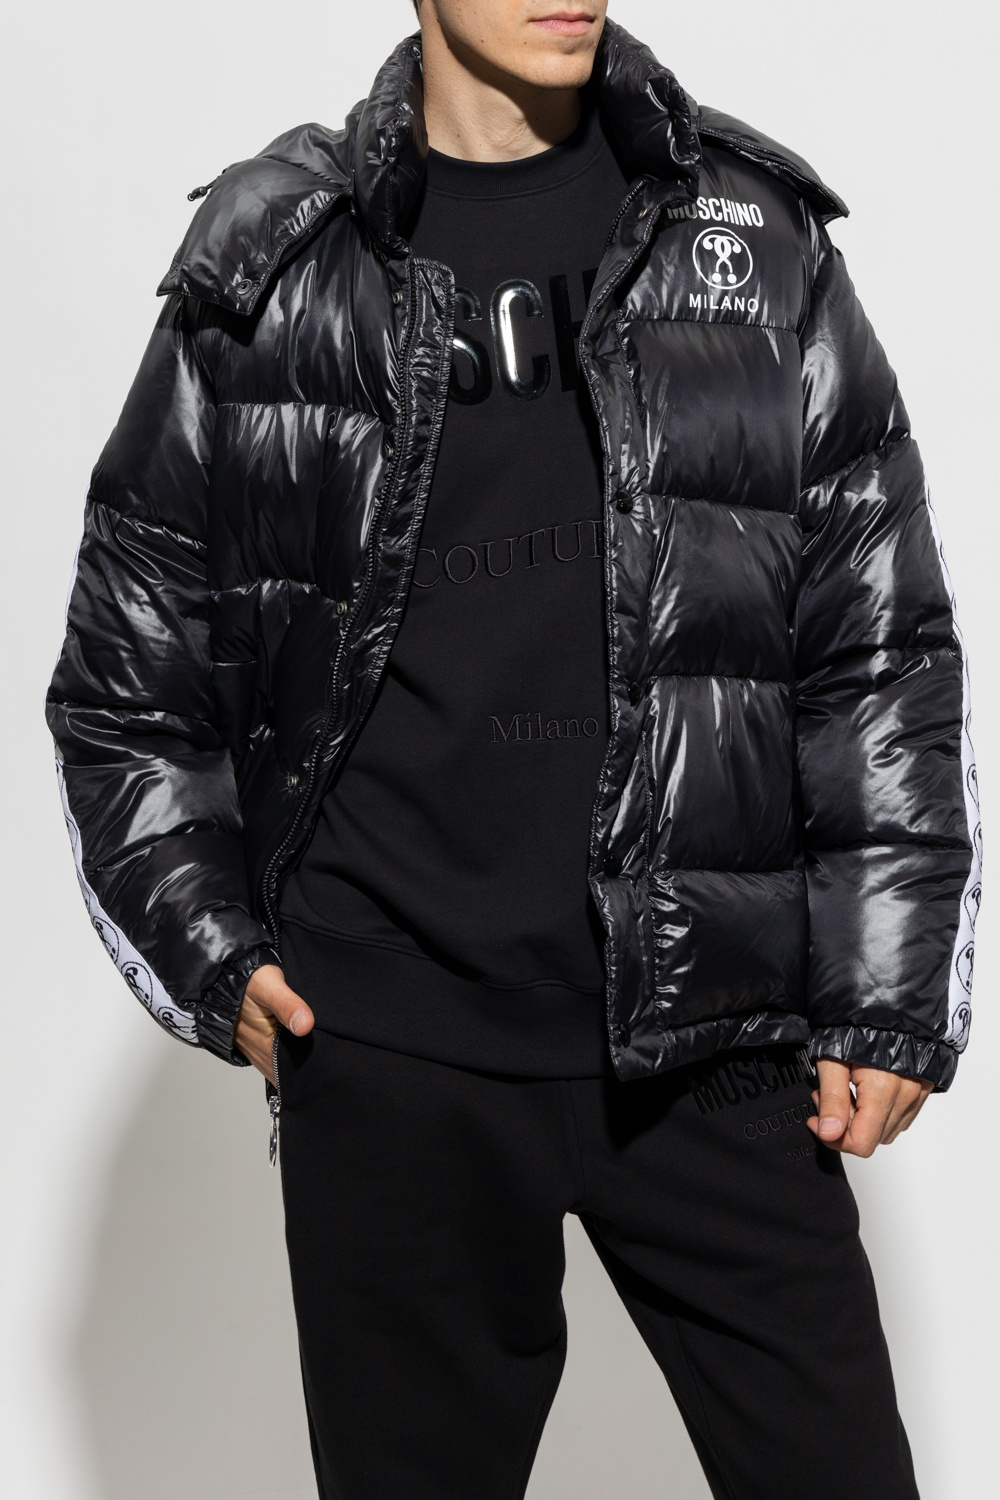 Moschino moncler cotton jersey and down jacket